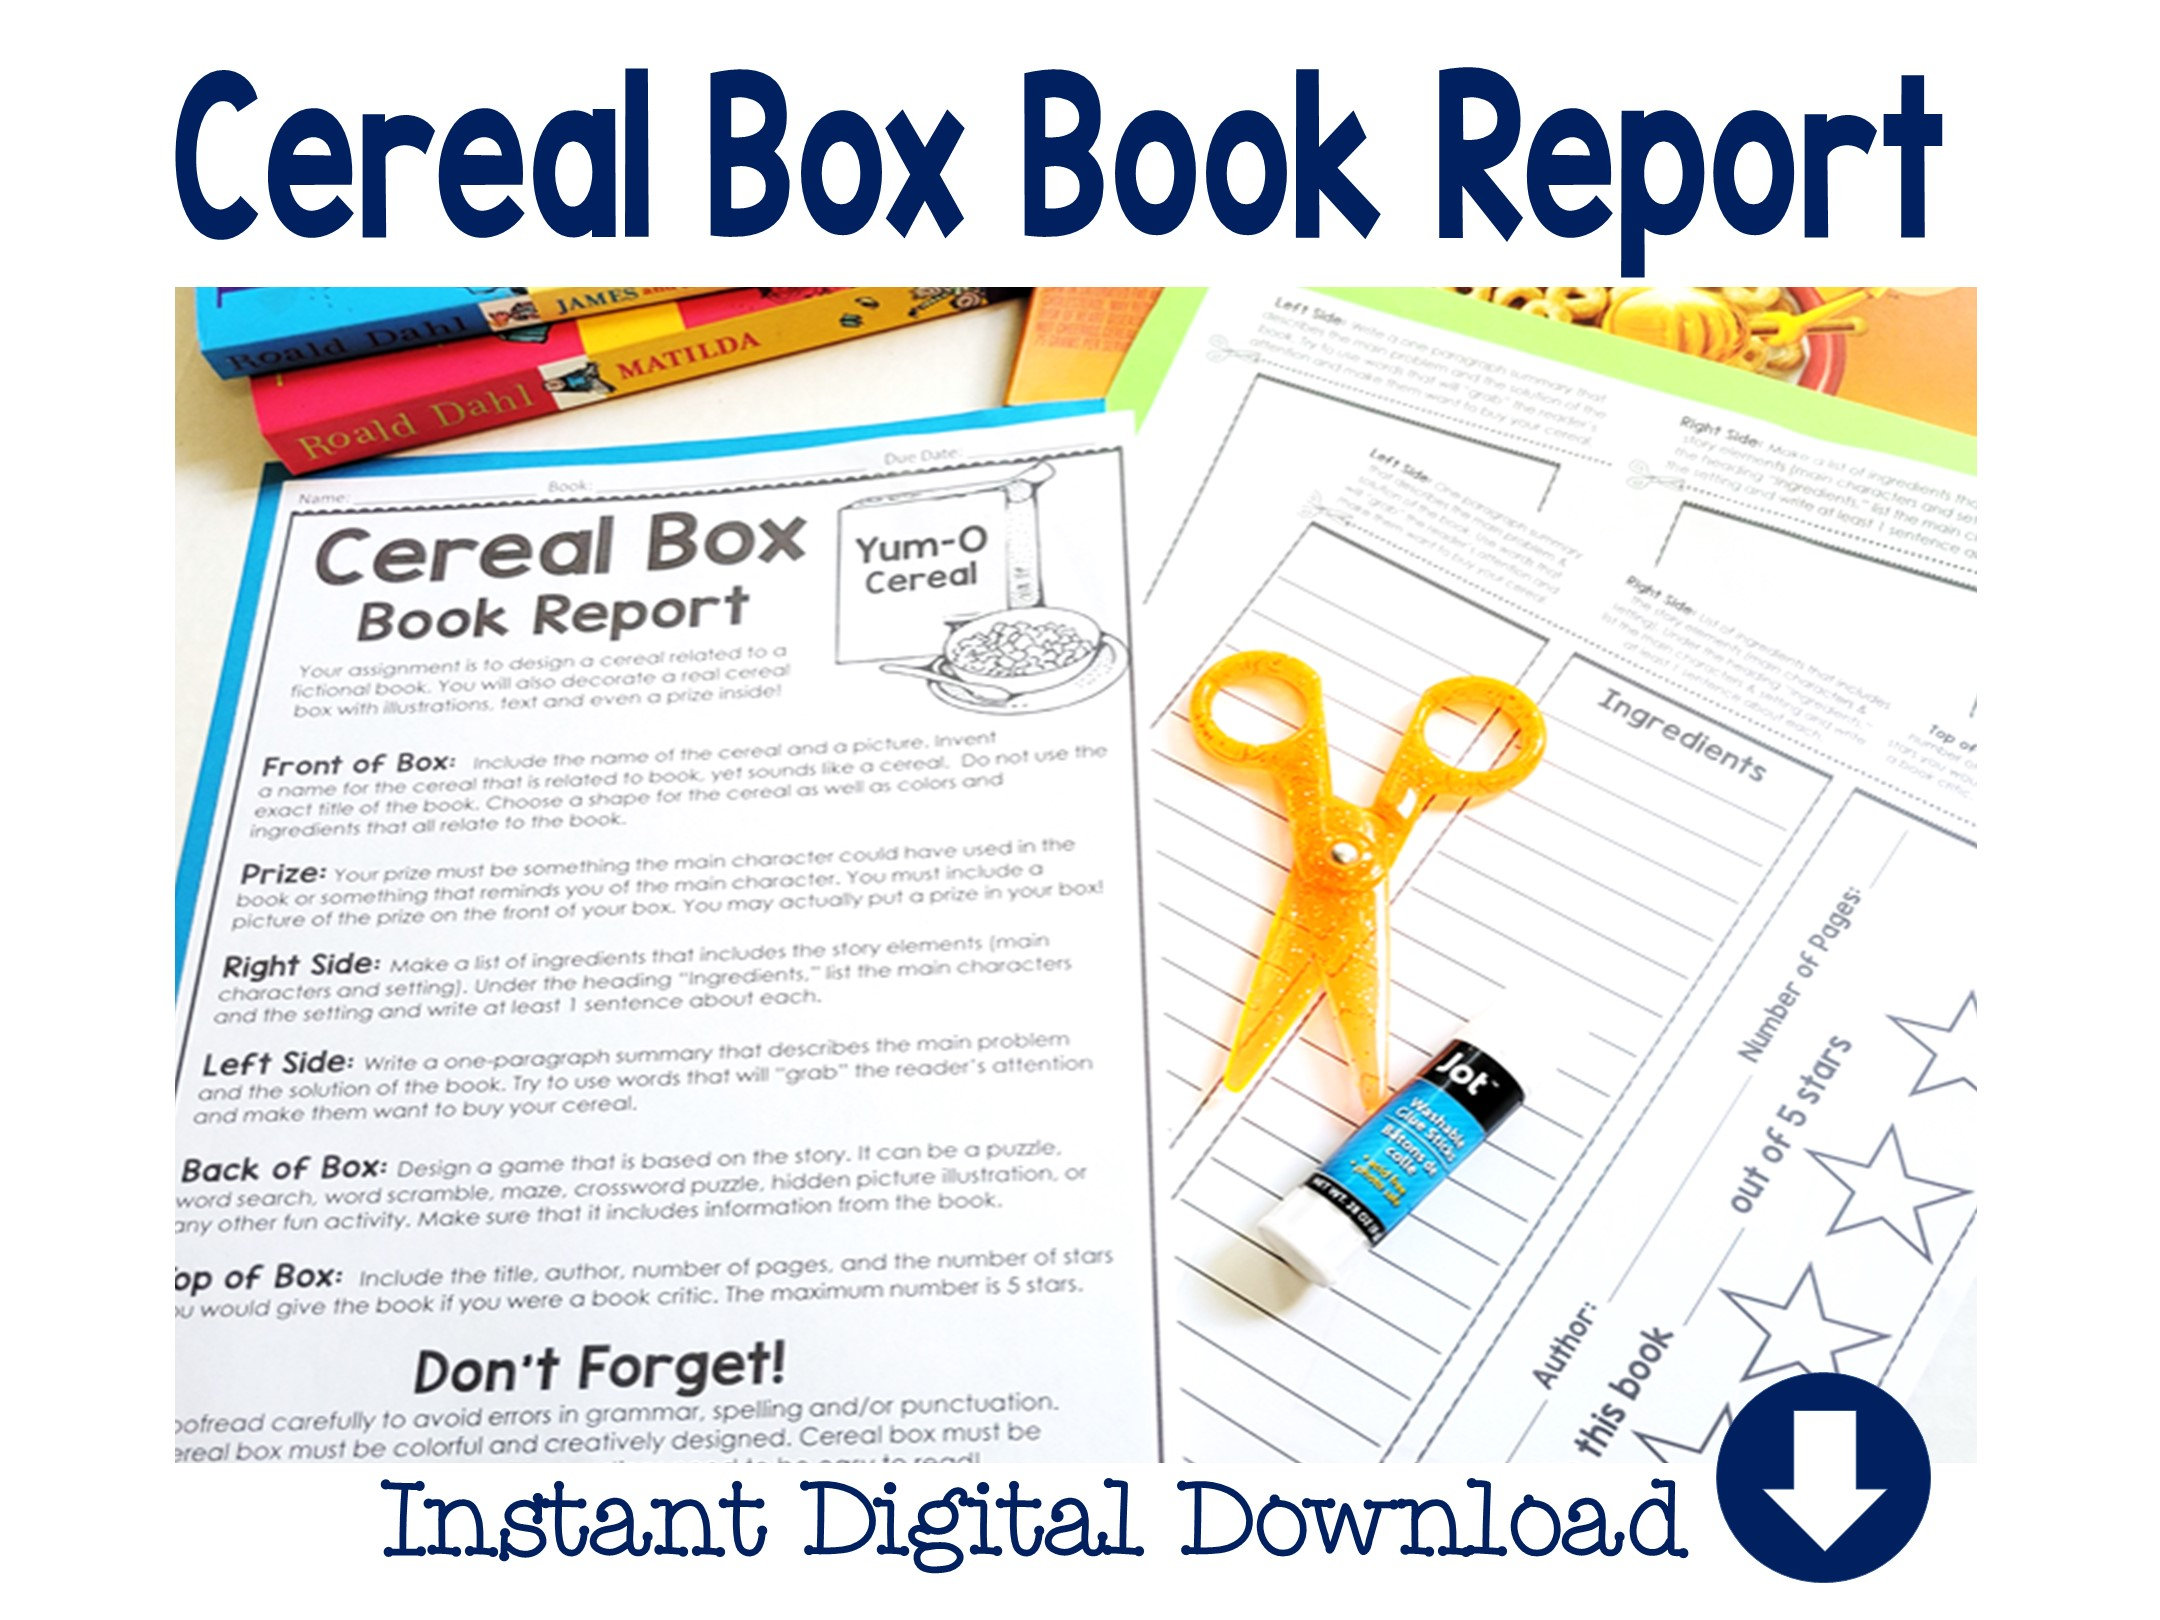 cereal box book report back of box